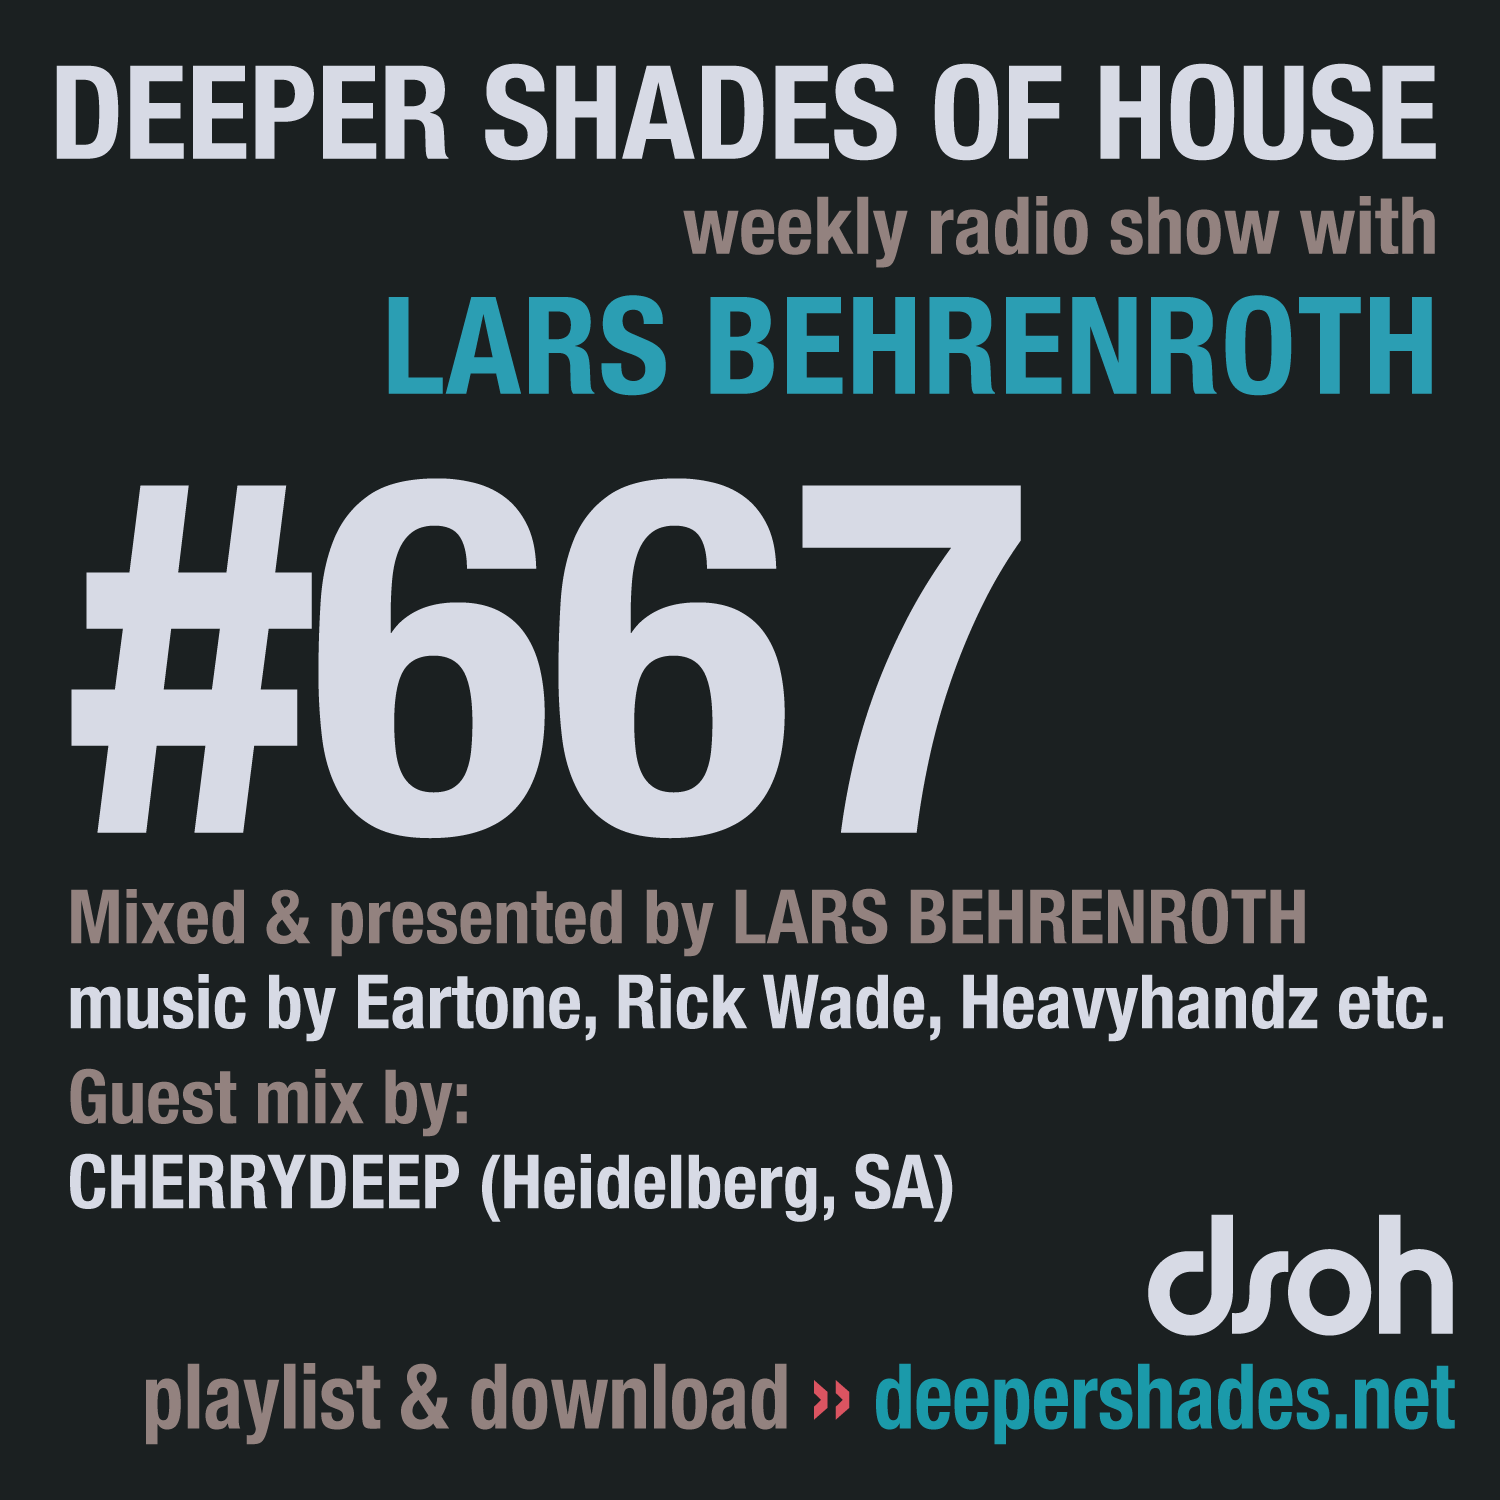 Deeper Shades Of House 667